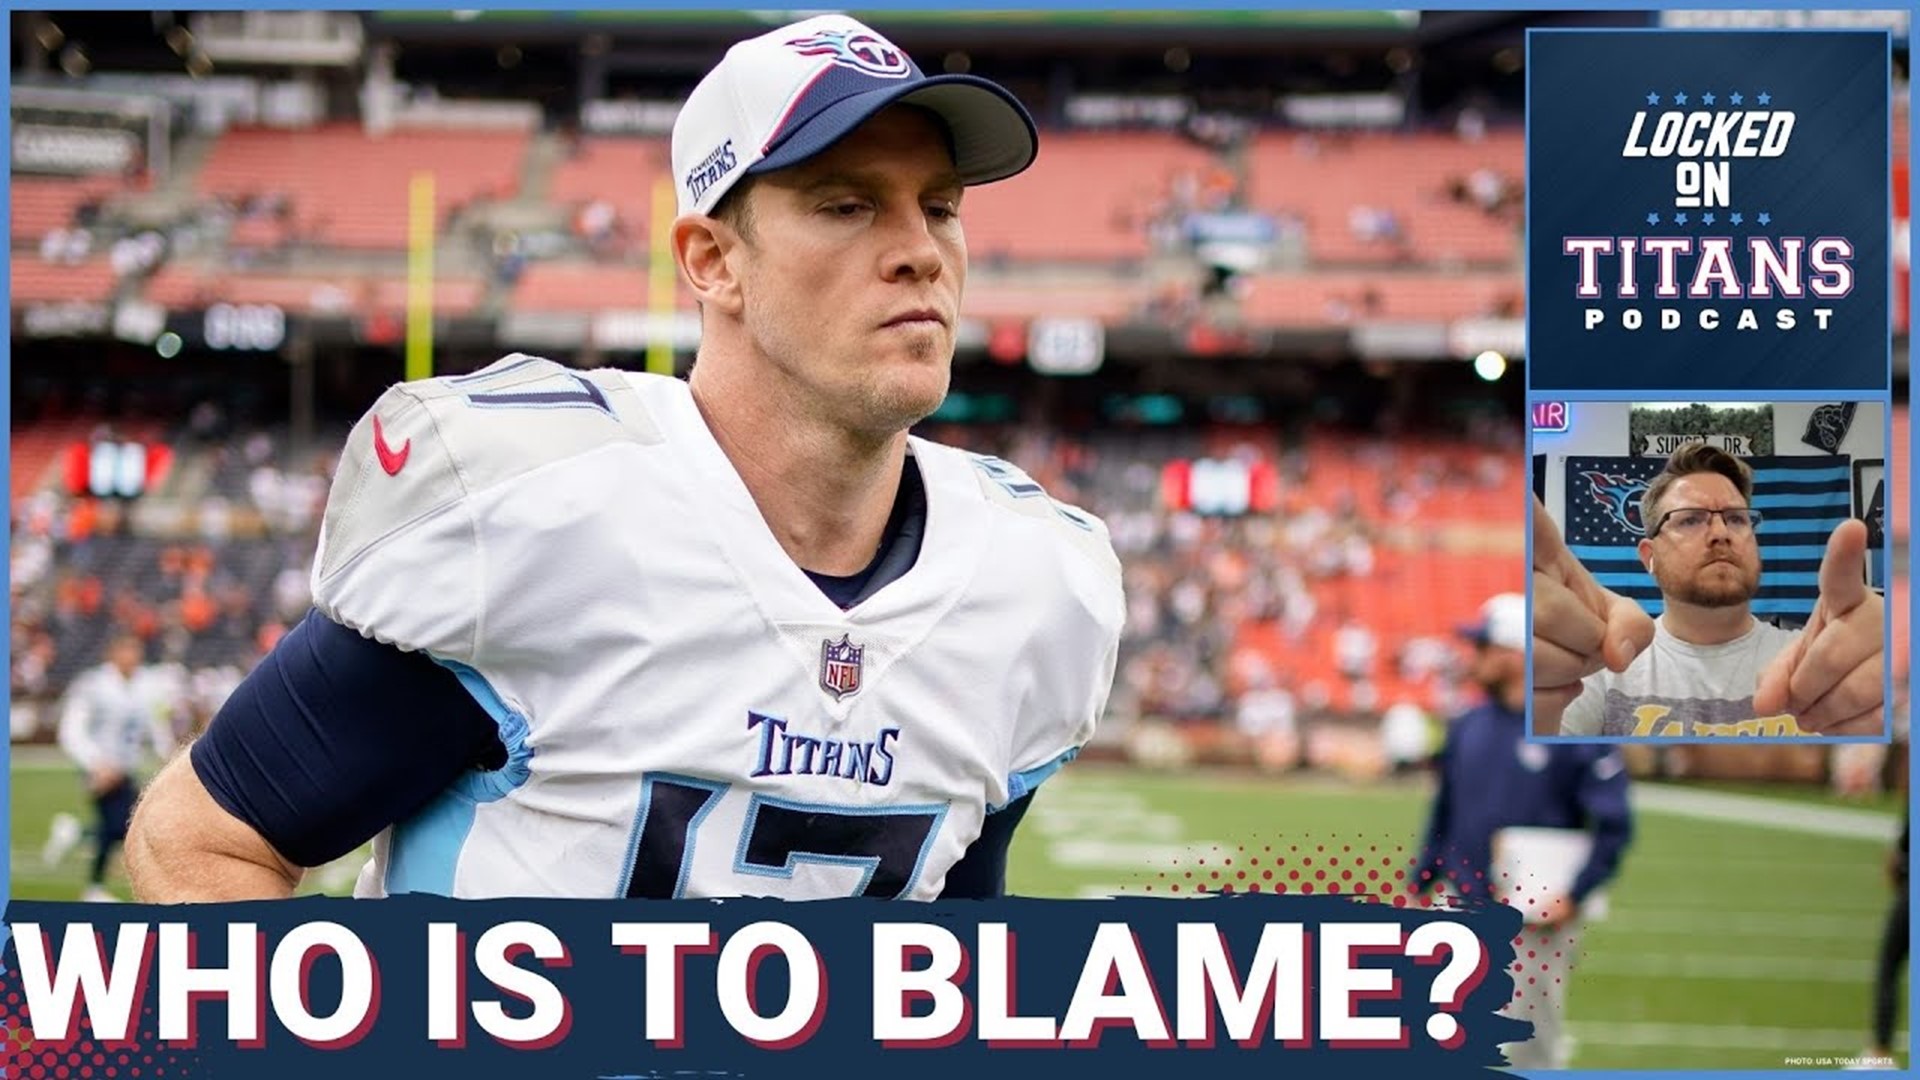 The Tennessee Titans offense has seen some terrible offensive line play and been let down by their quarterback, but the film shows that EVERYONE is to blame for this